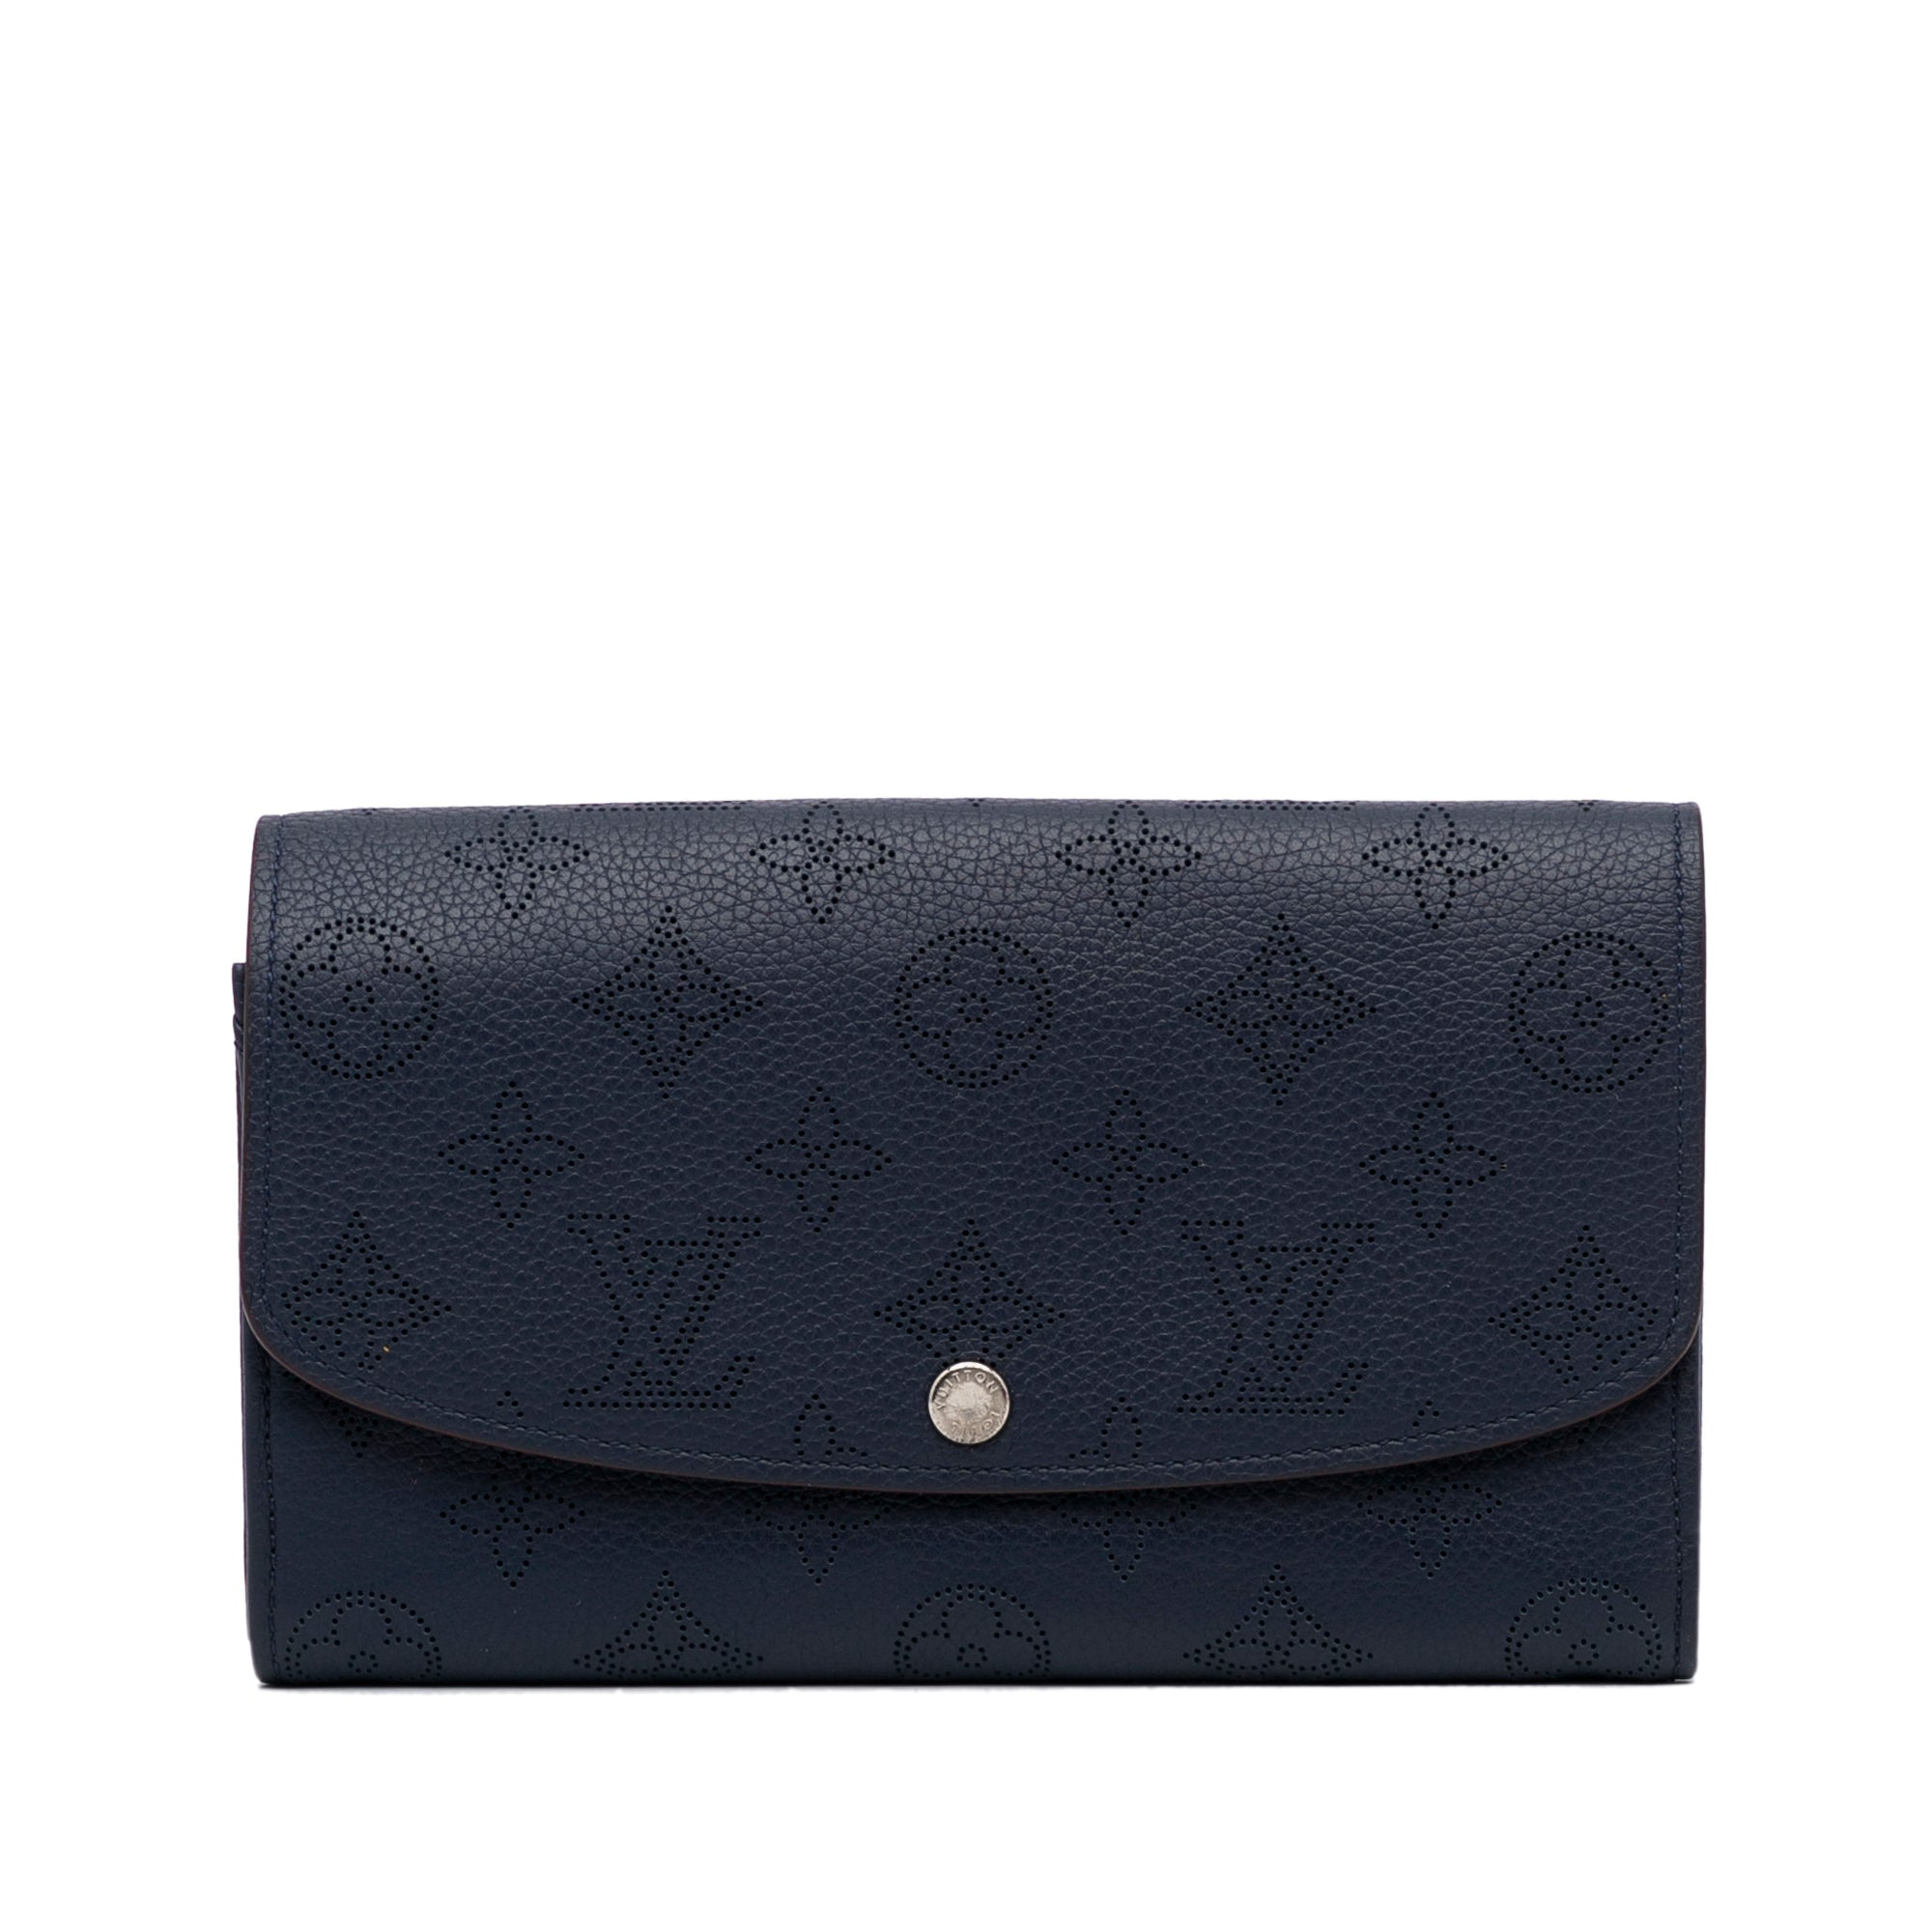 Authenticated Used Louis Vuitton LOUIS VUITTON Mahina Portefeuille